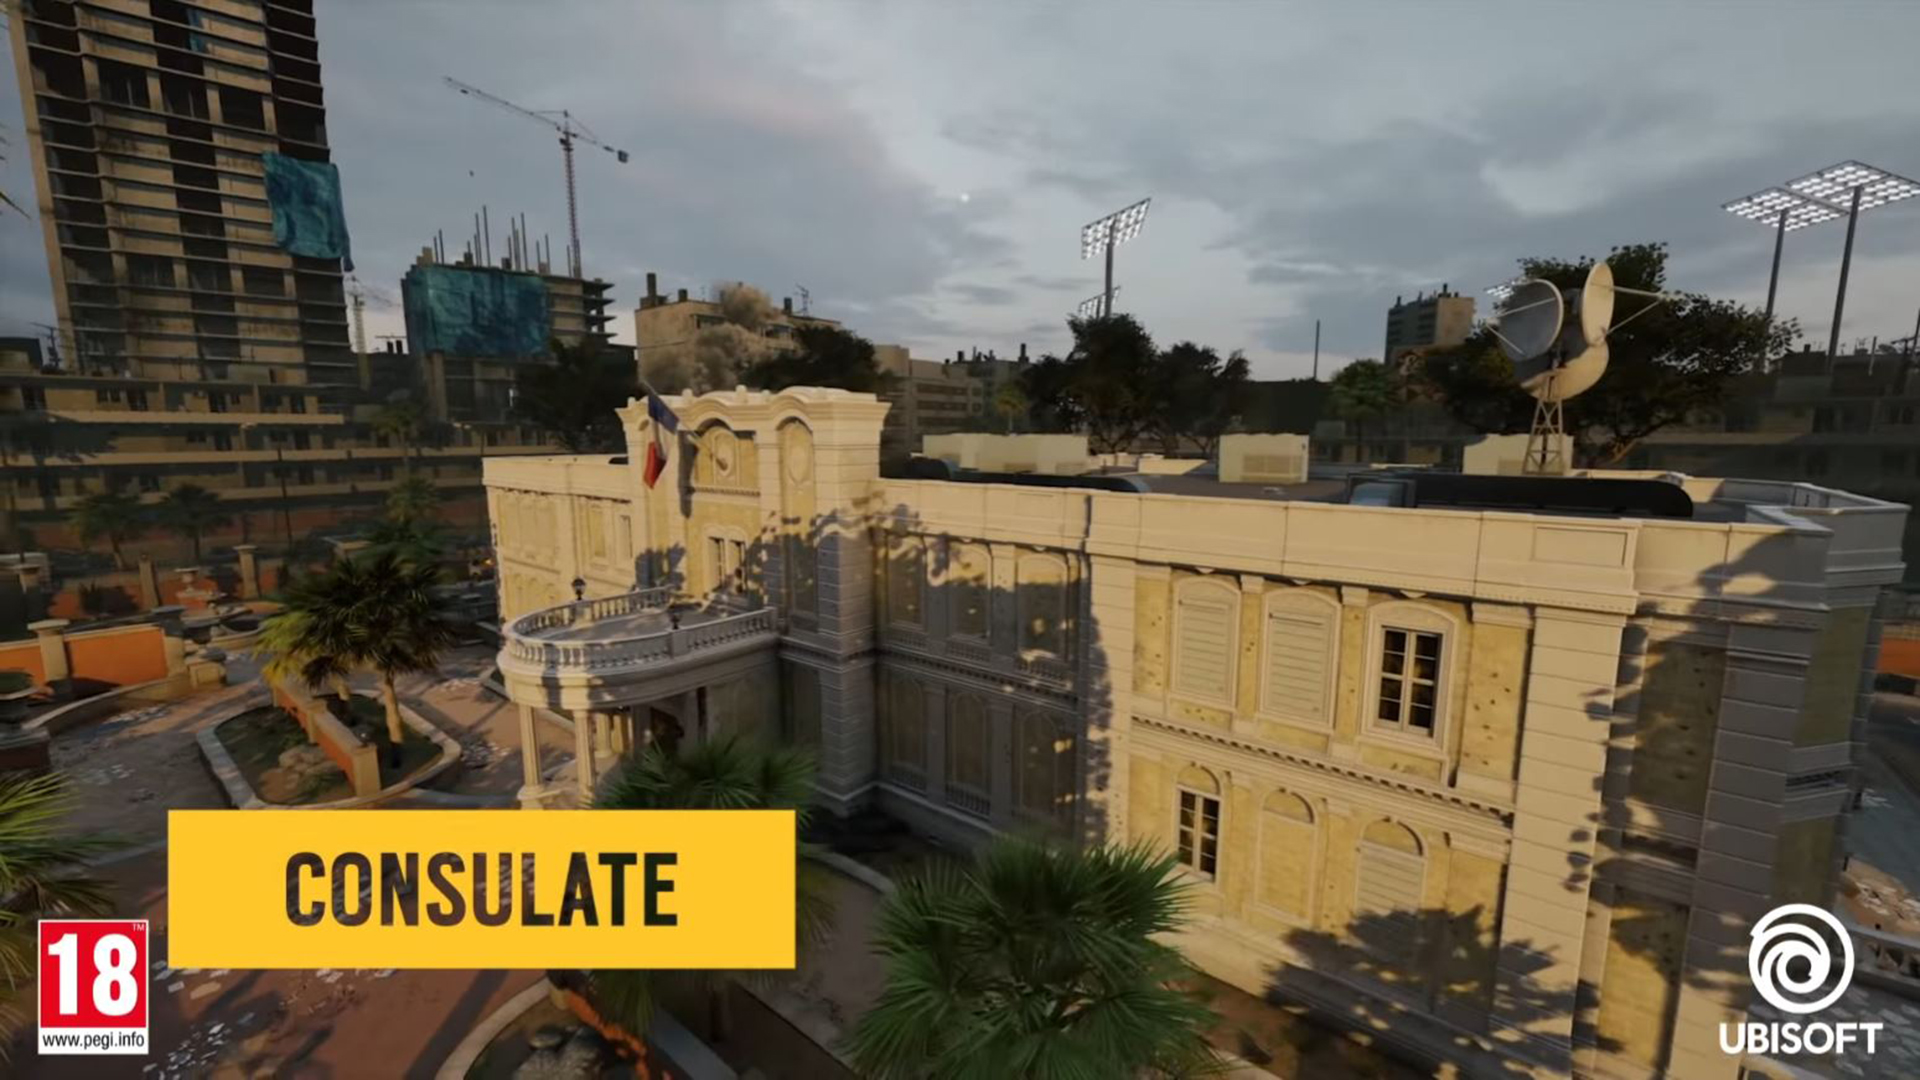 rainbow-six-siege-hints-at-a-new-extraction-themed-event-on-the-consulate-map-techradar